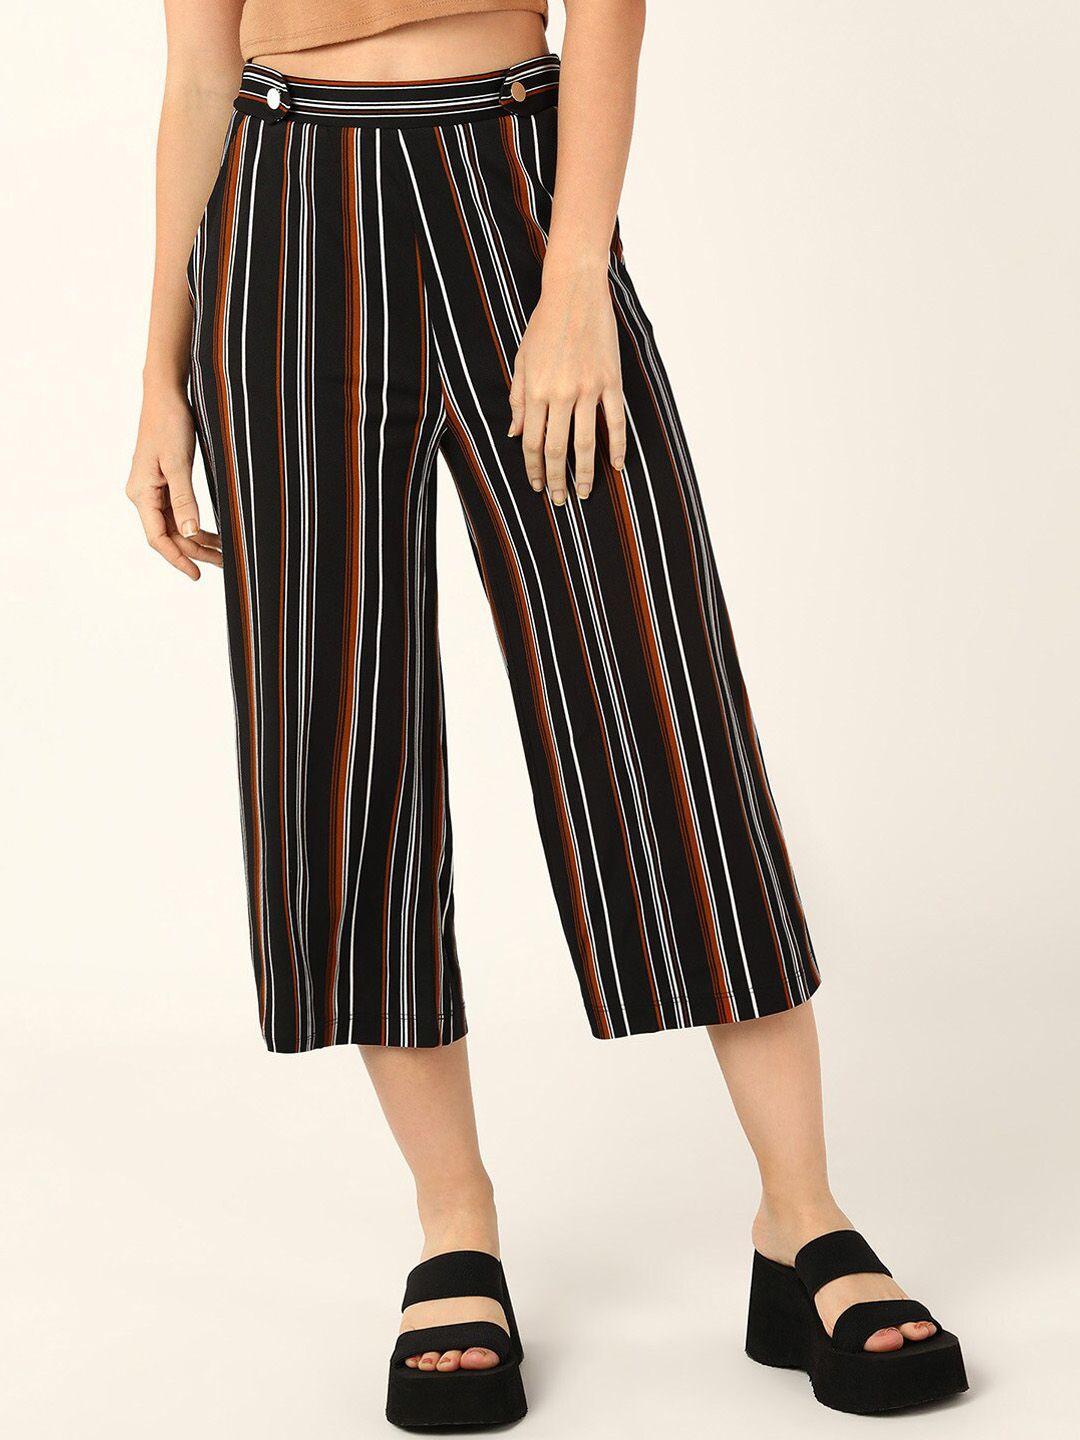 mast & harbour women striped culottes trousers